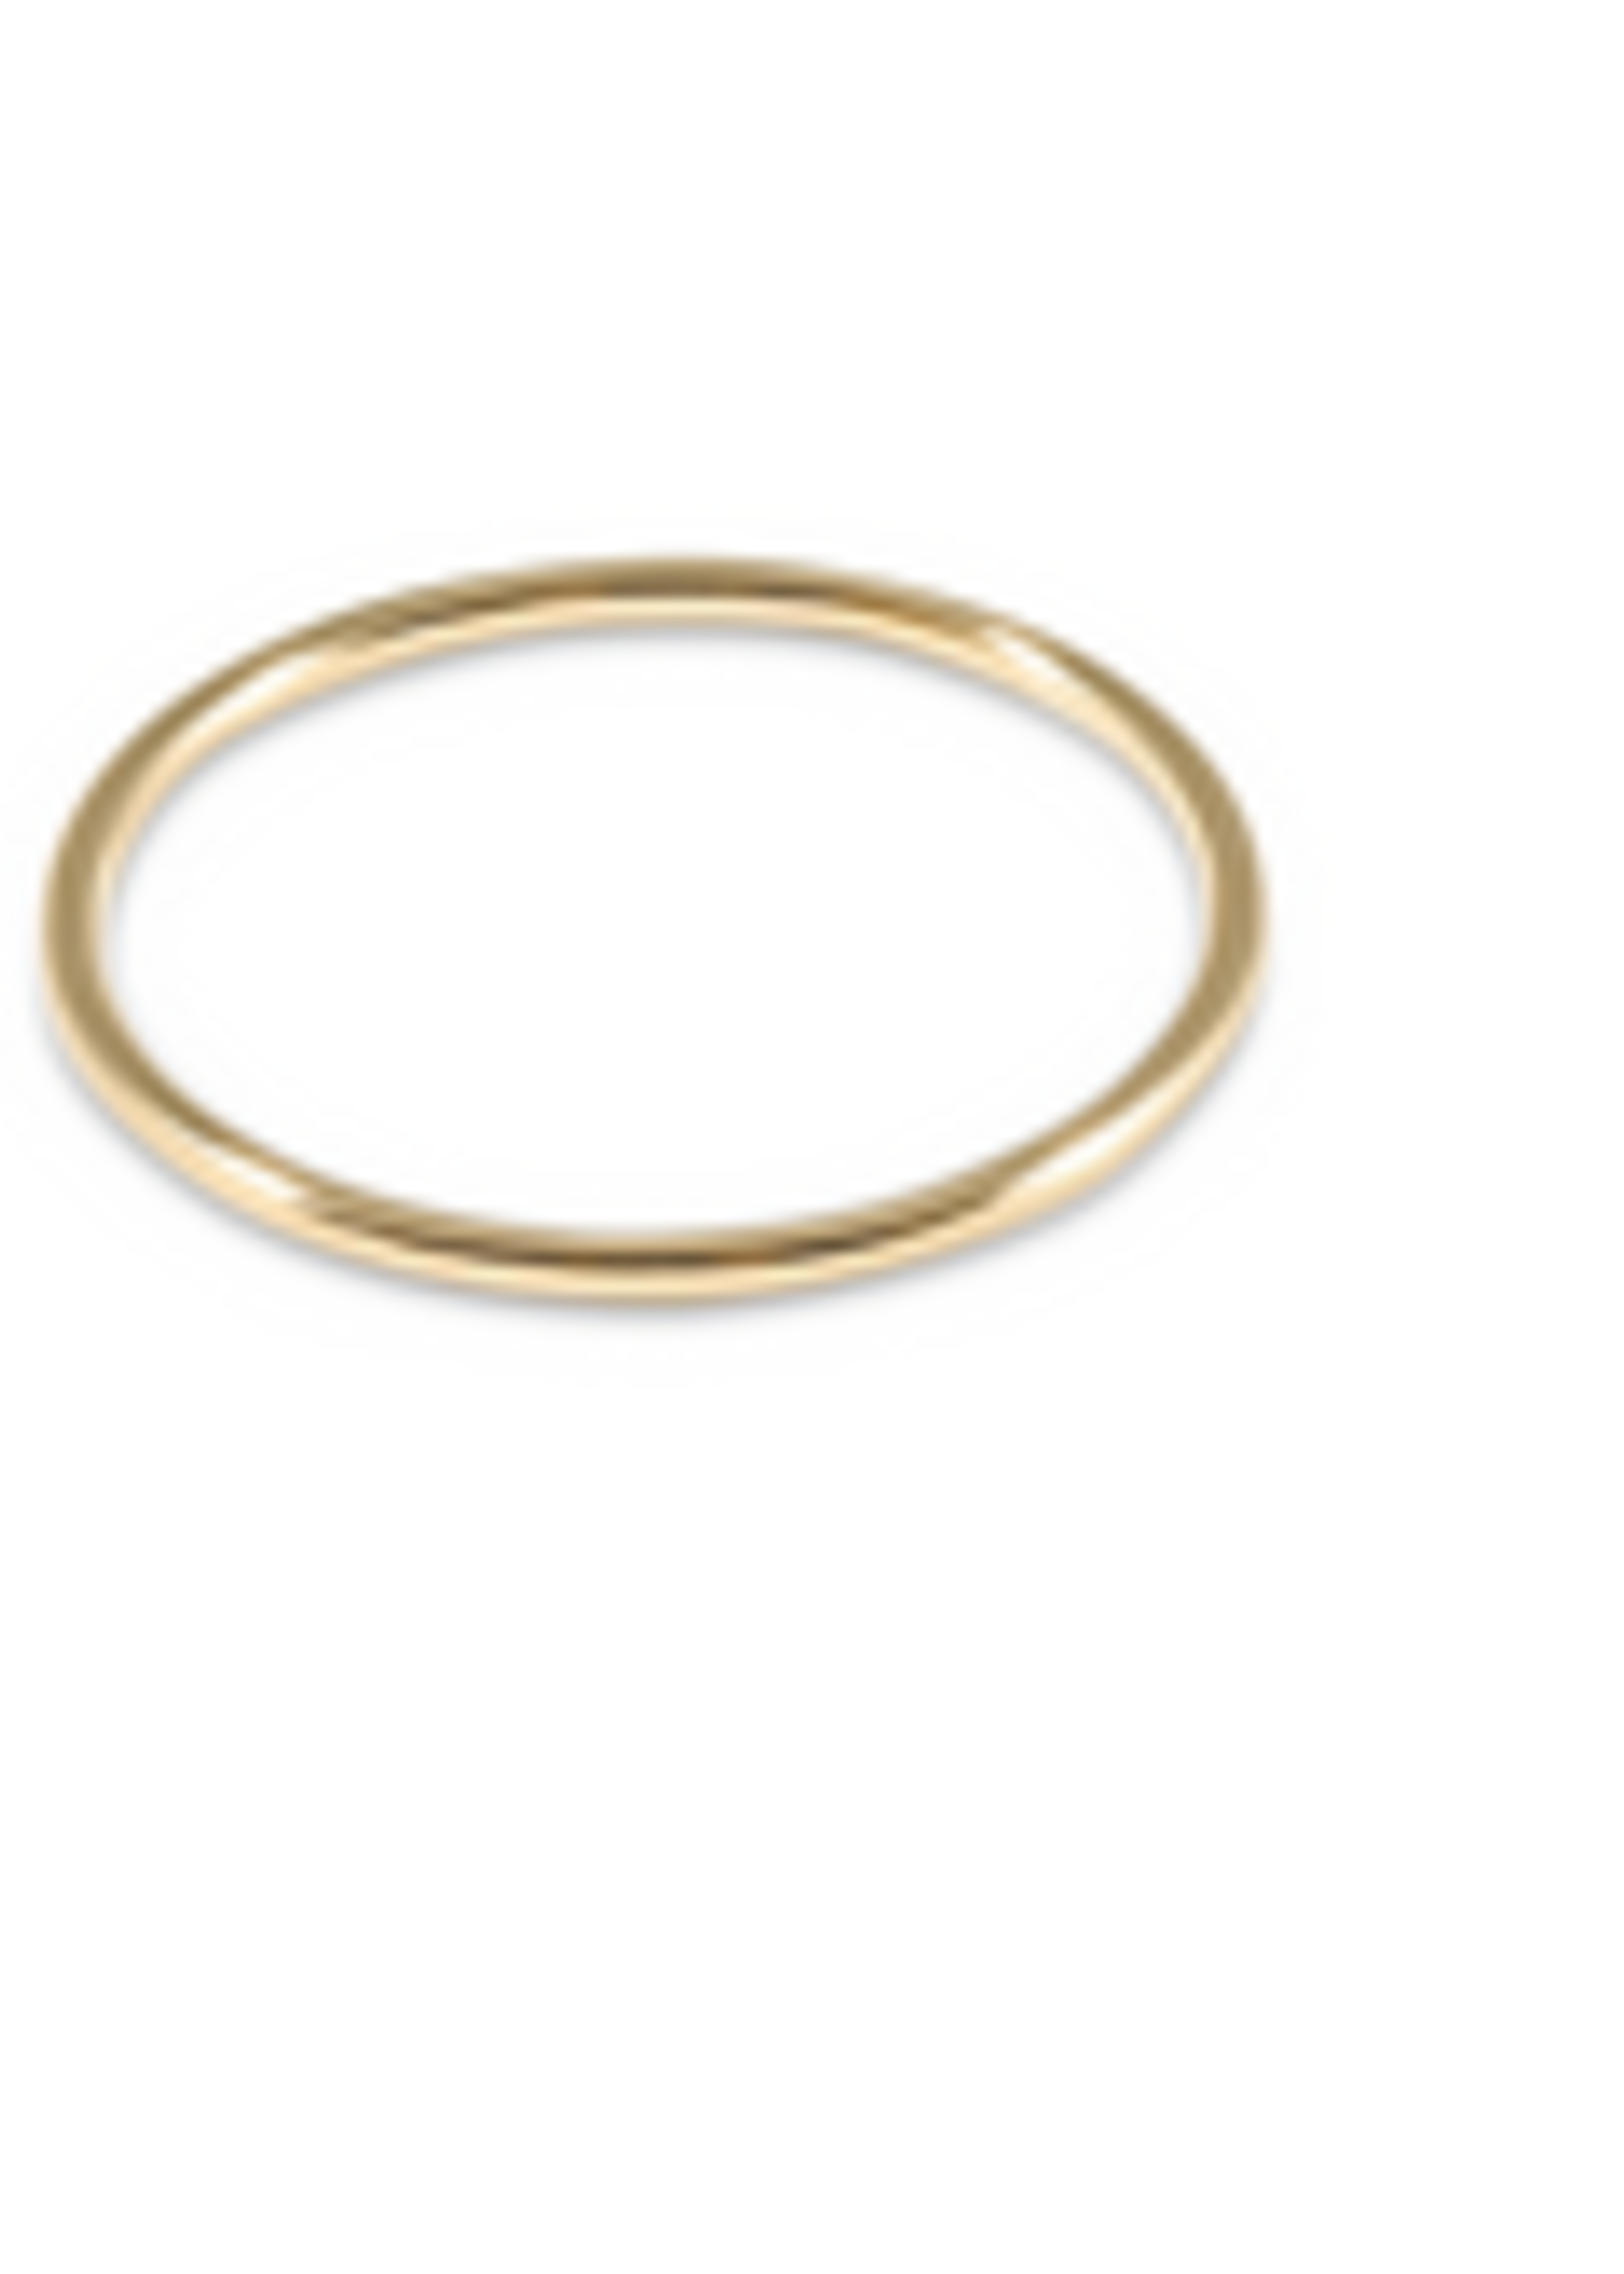 CLASSIC BAND THIN RING